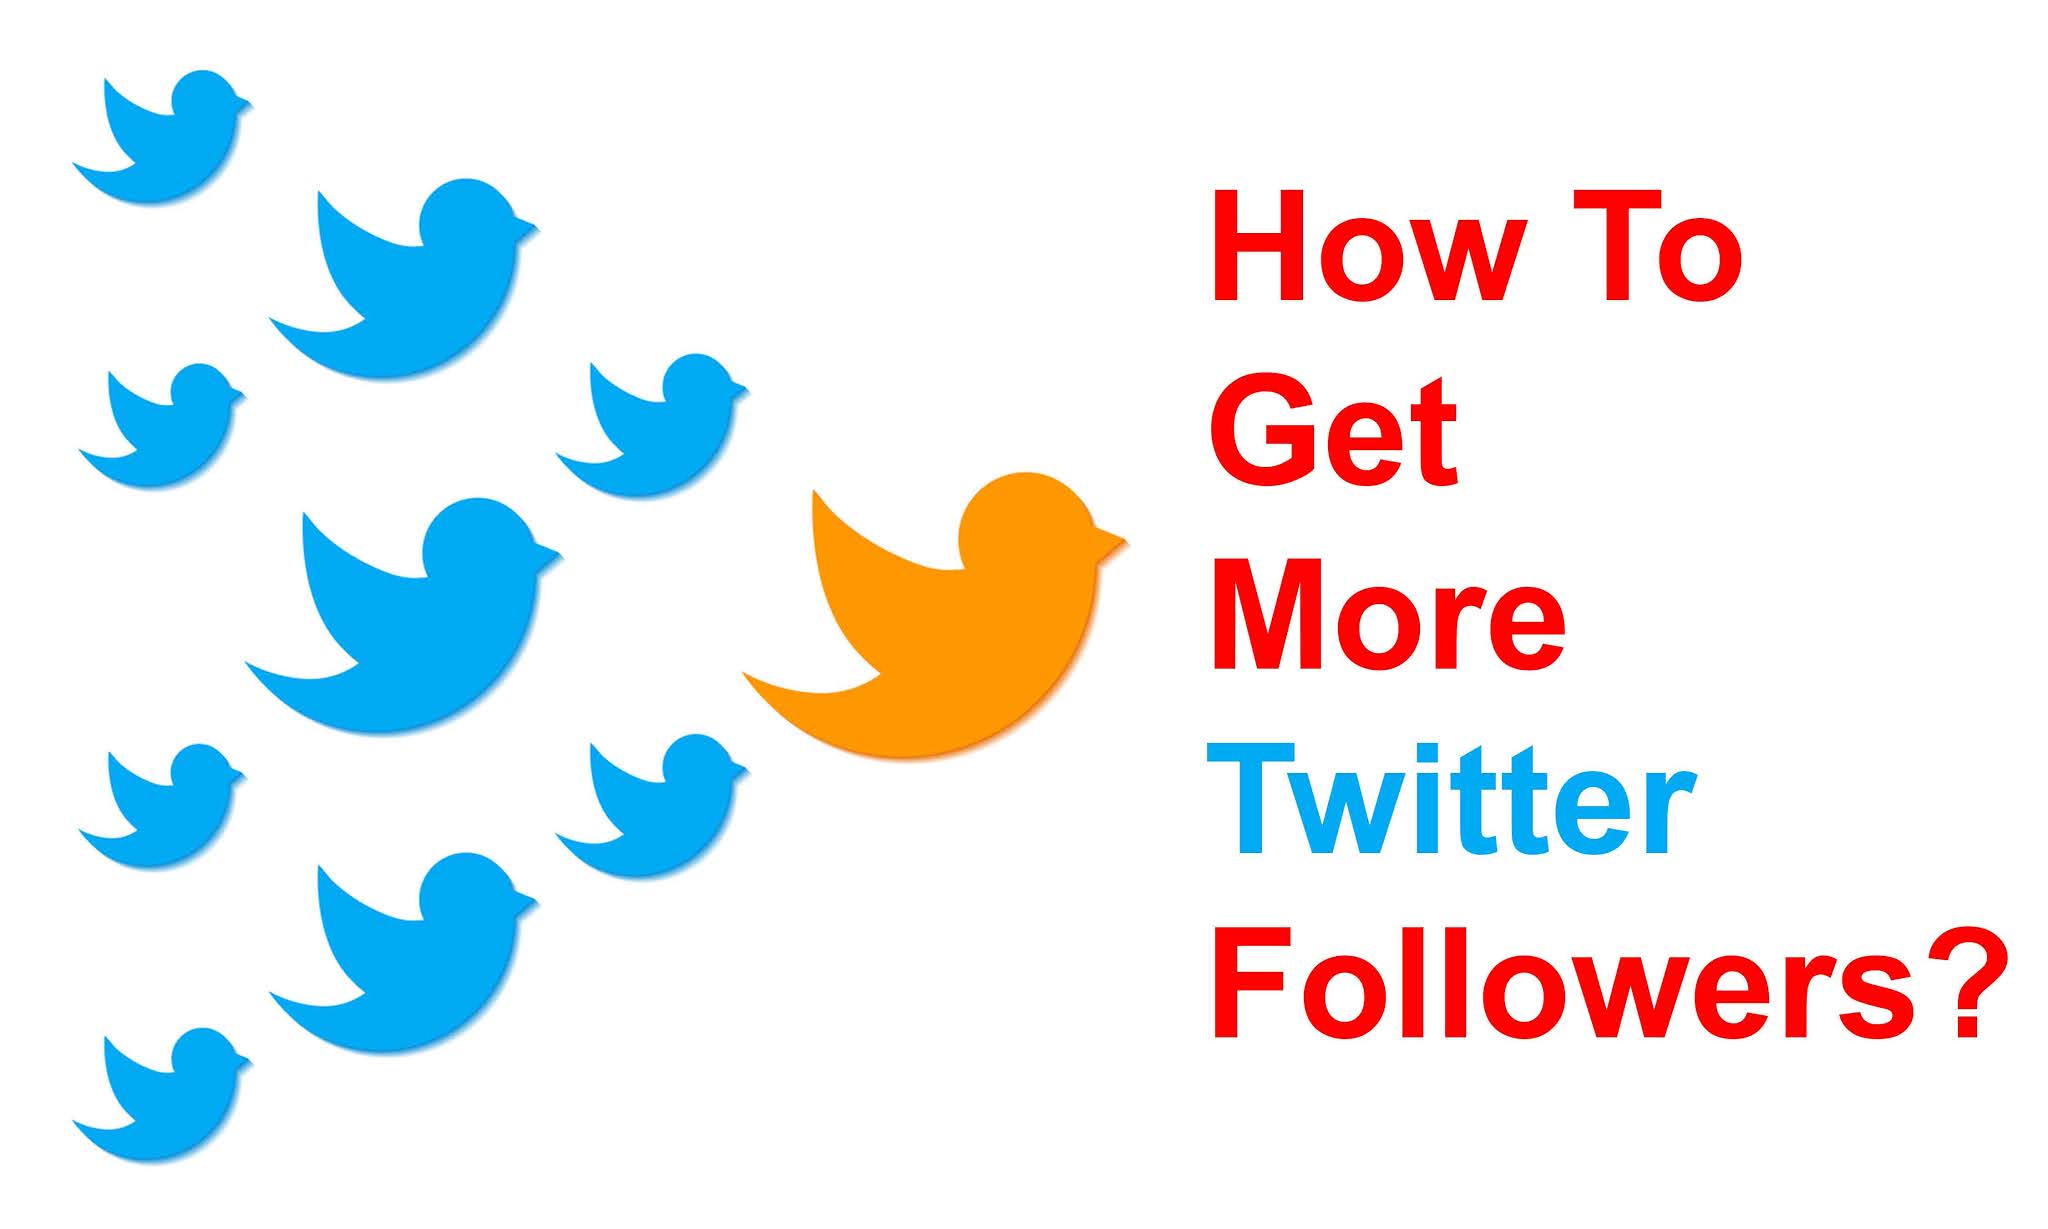 8 steps for Get more Followers on Twitter